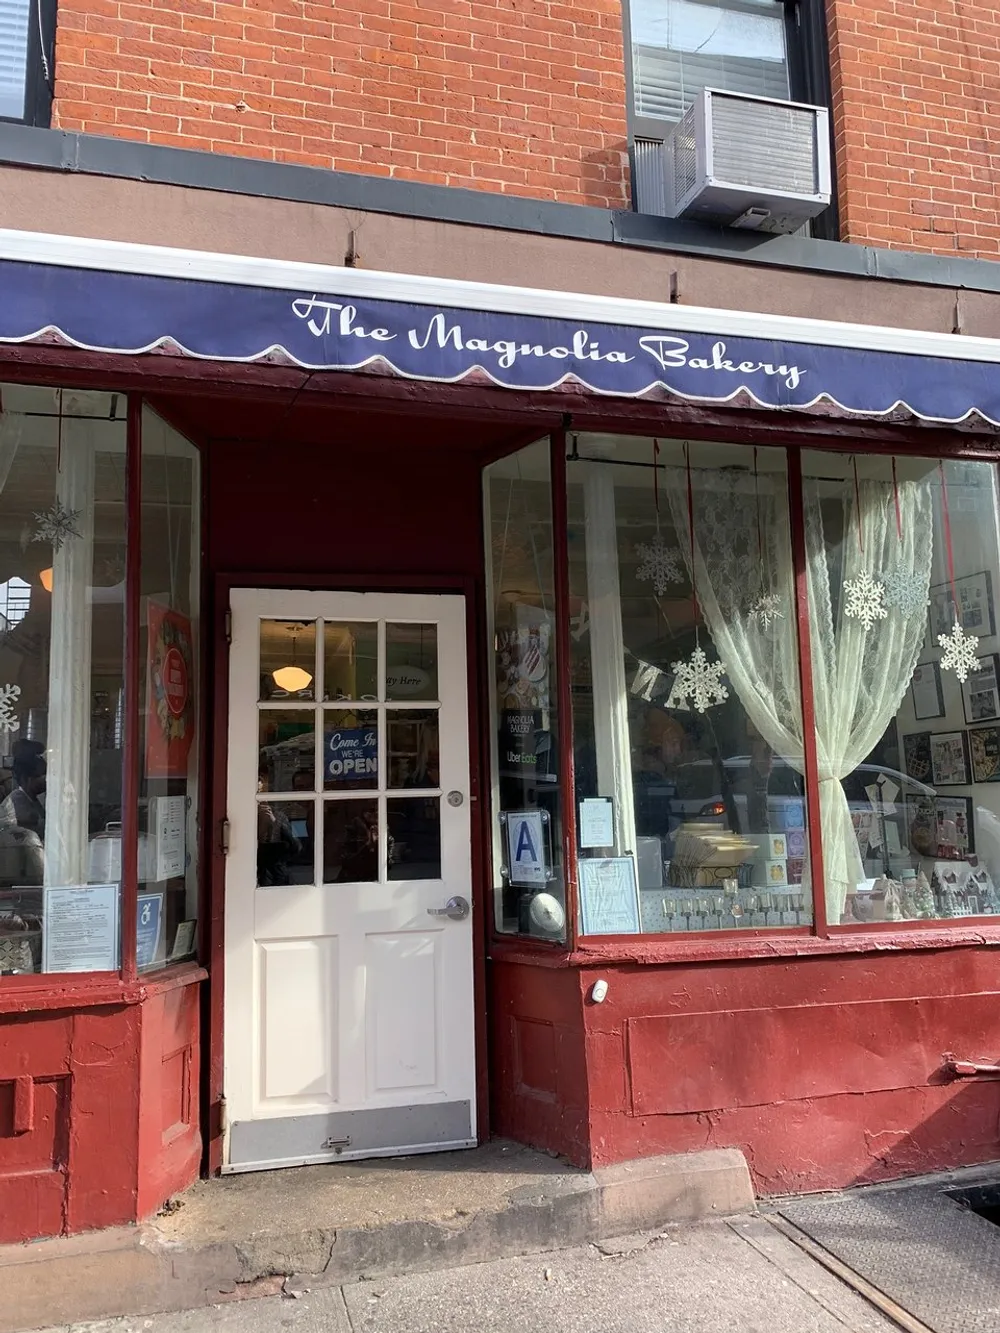 The image shows the exterior of The Magnolia Bakery with a classic red and navy storefront complete with a white door lace-curtained windows and an Open sign suggesting its ready for business